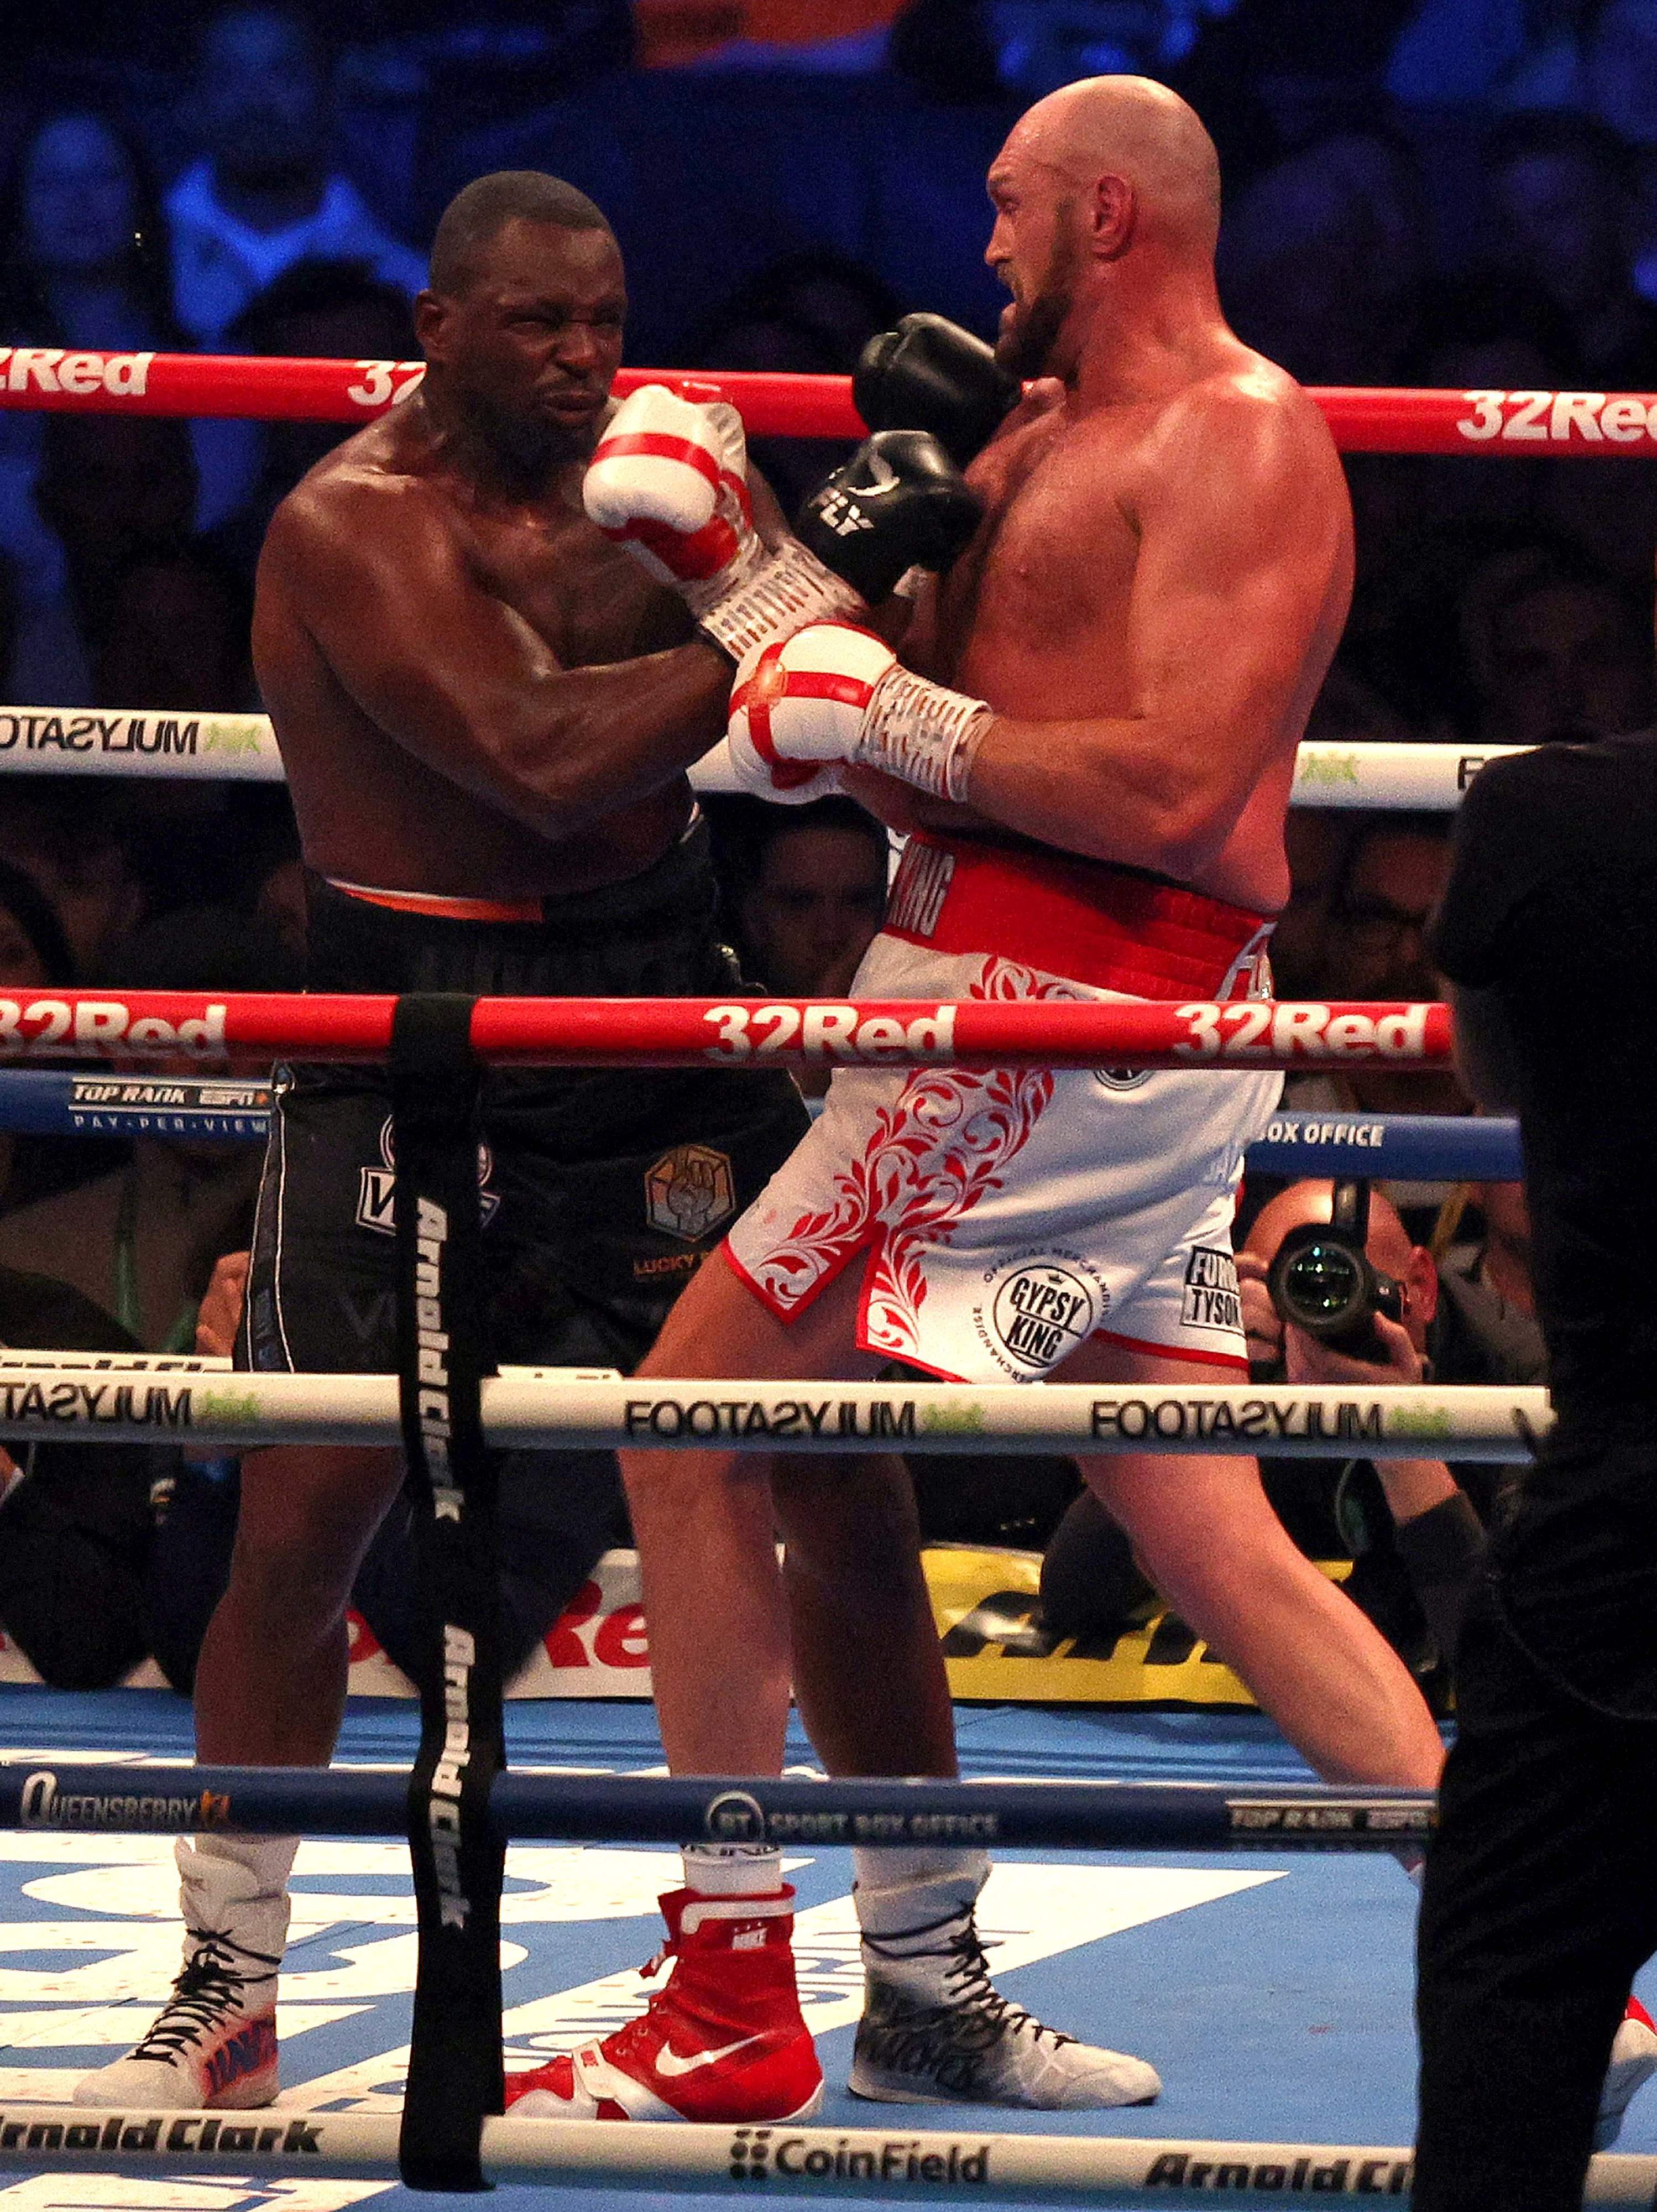 Tyson Fury lands lands the big uppercut to knock out Dillian Whyte in the sixth round.